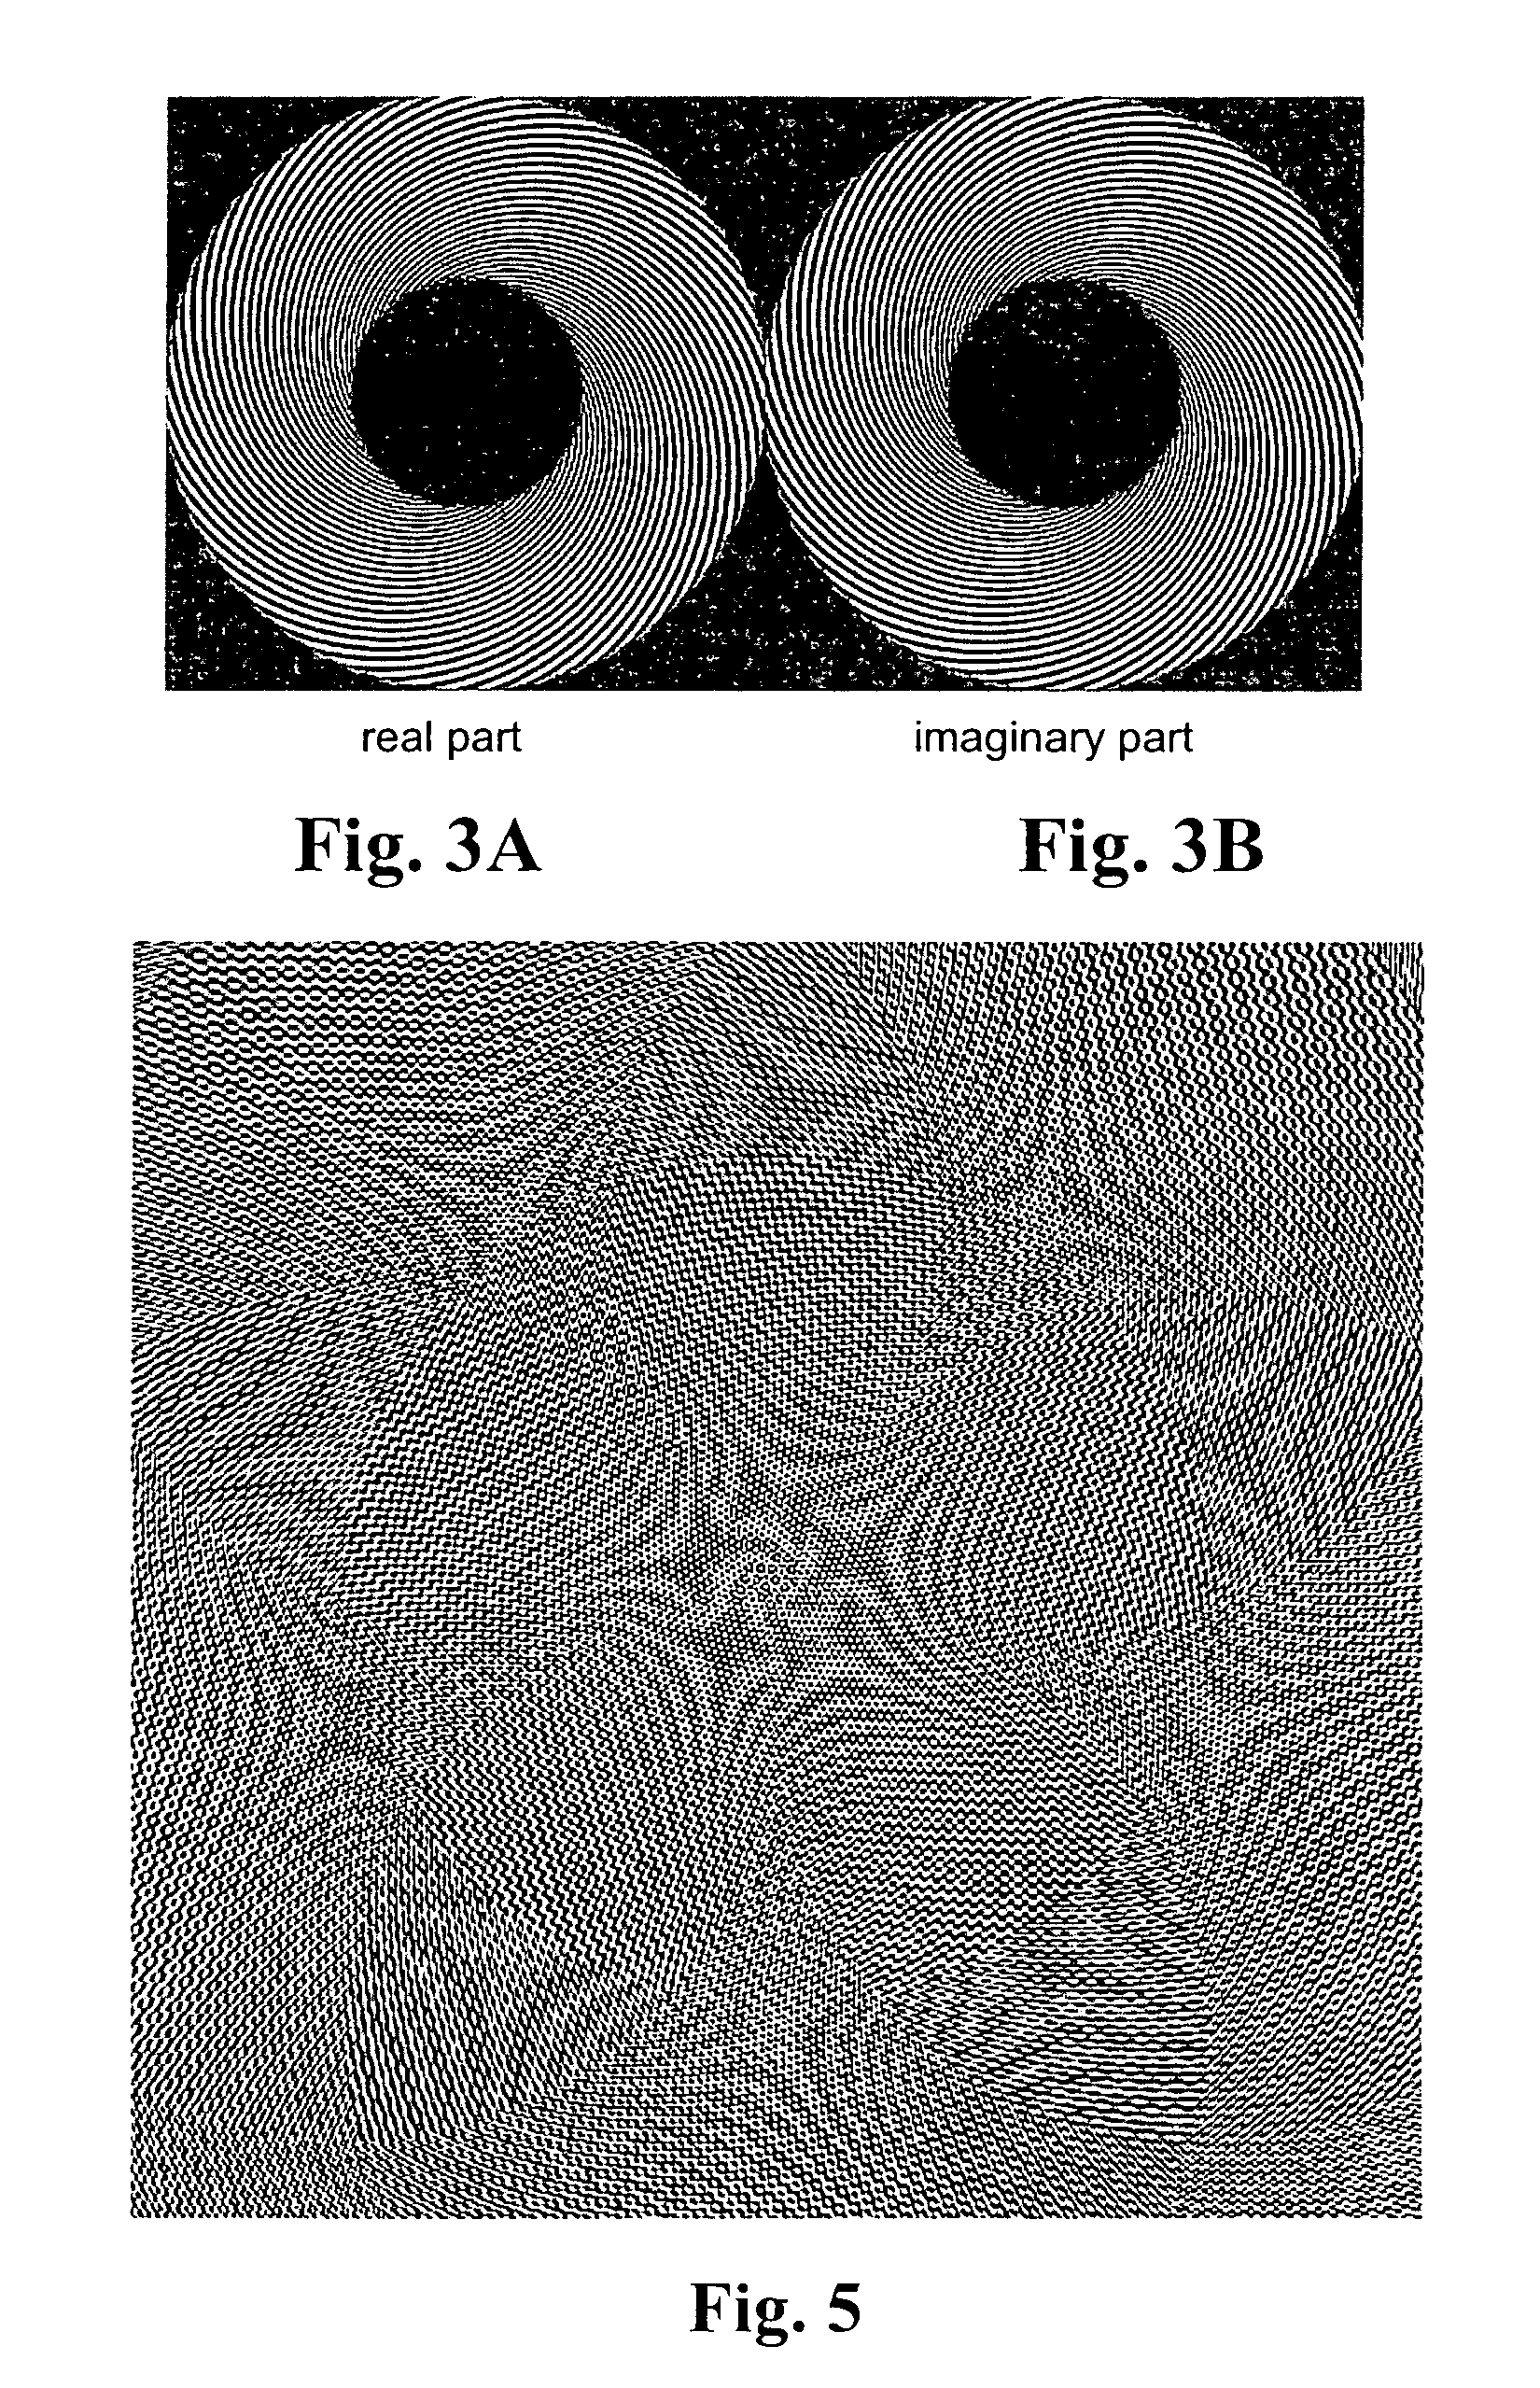 Method for generating and detecting marks